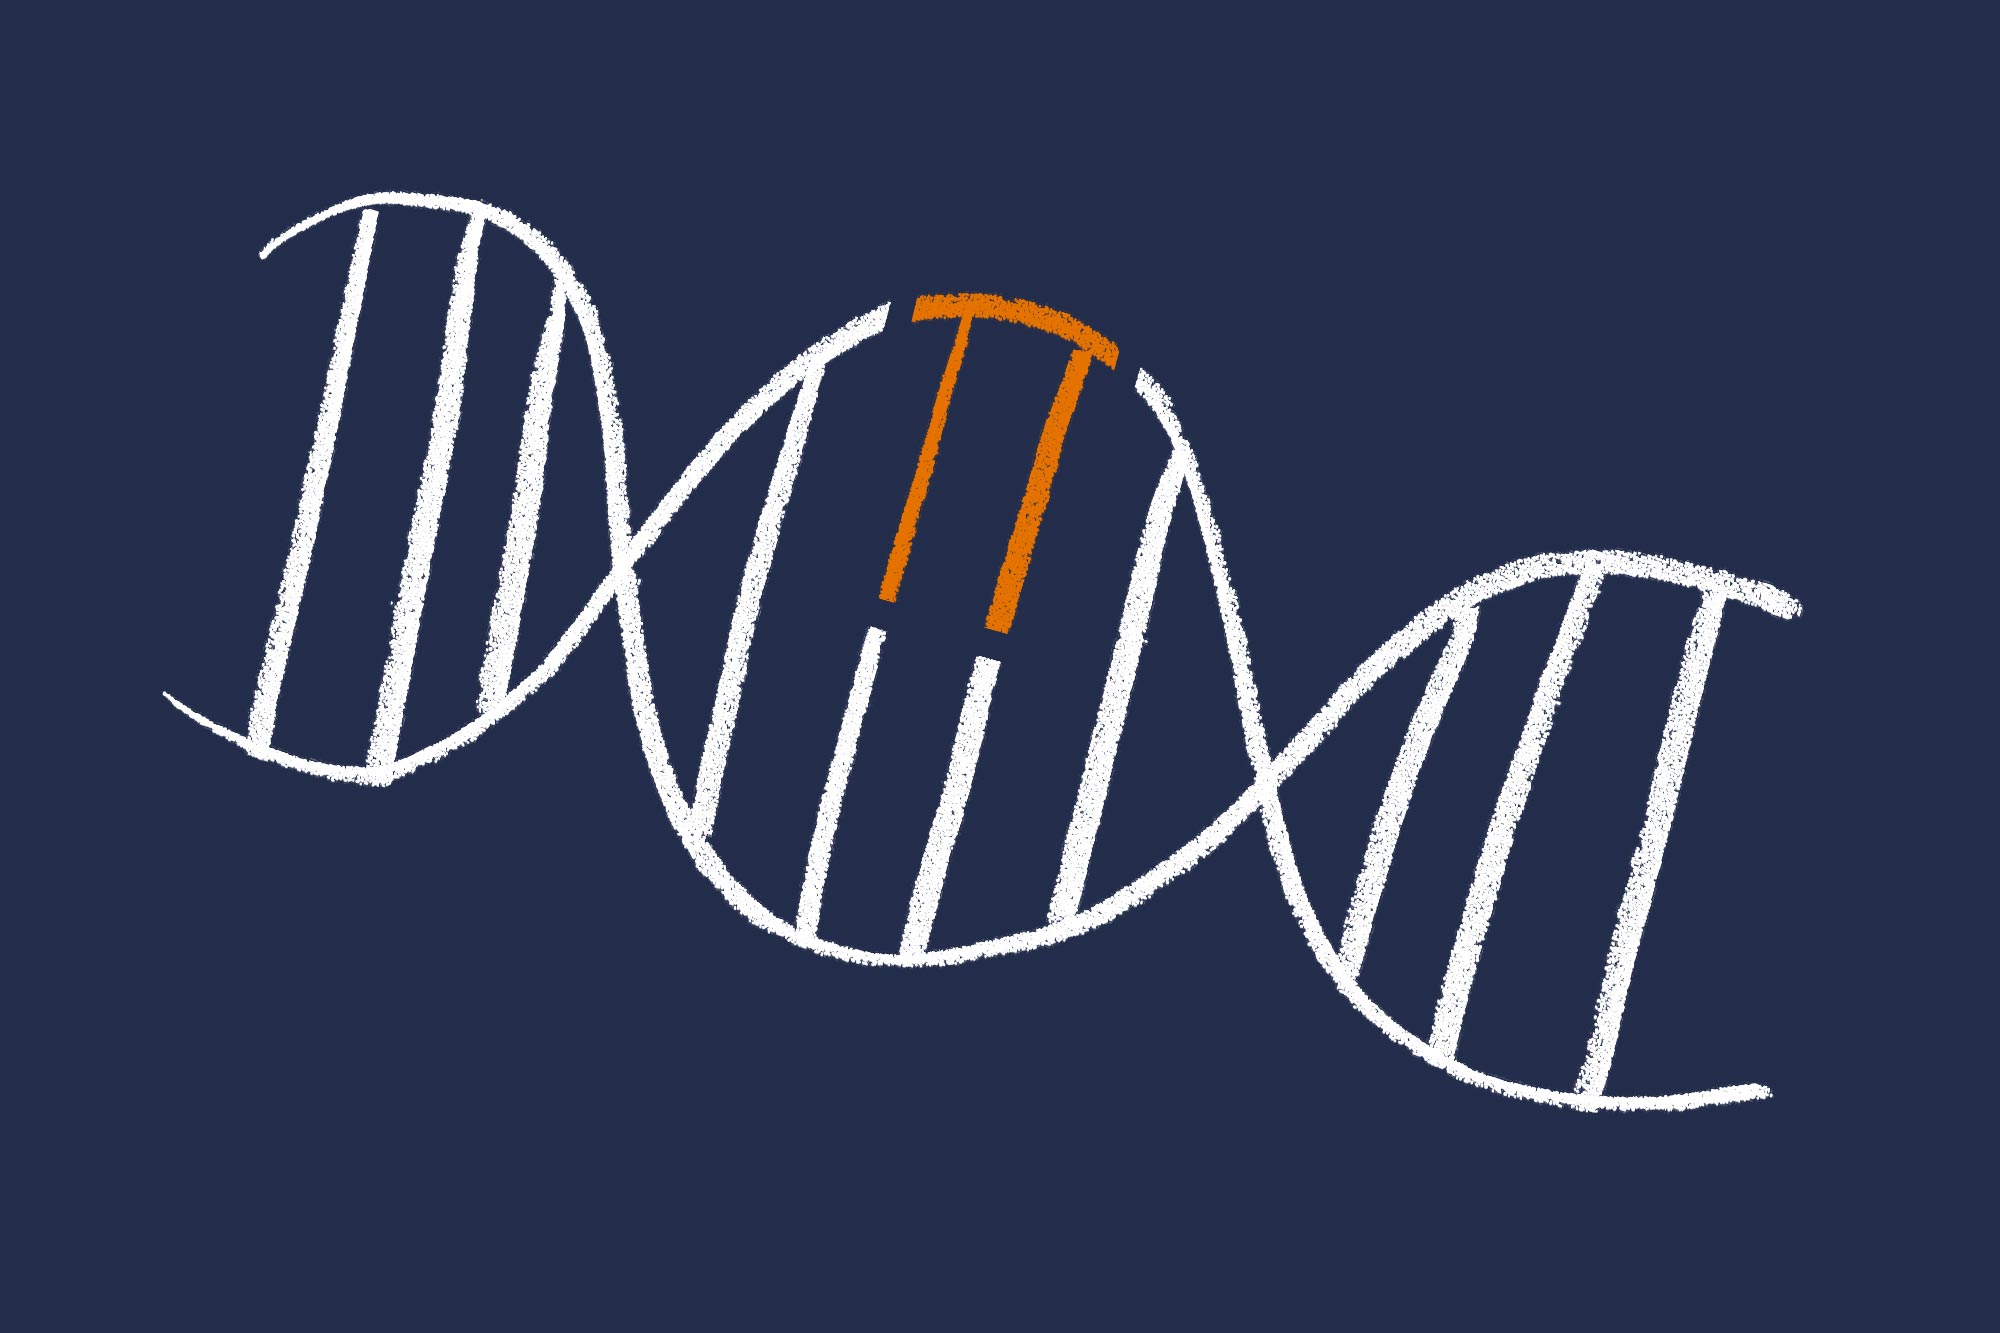 Illustration of a DNA helix with to rods higlighted